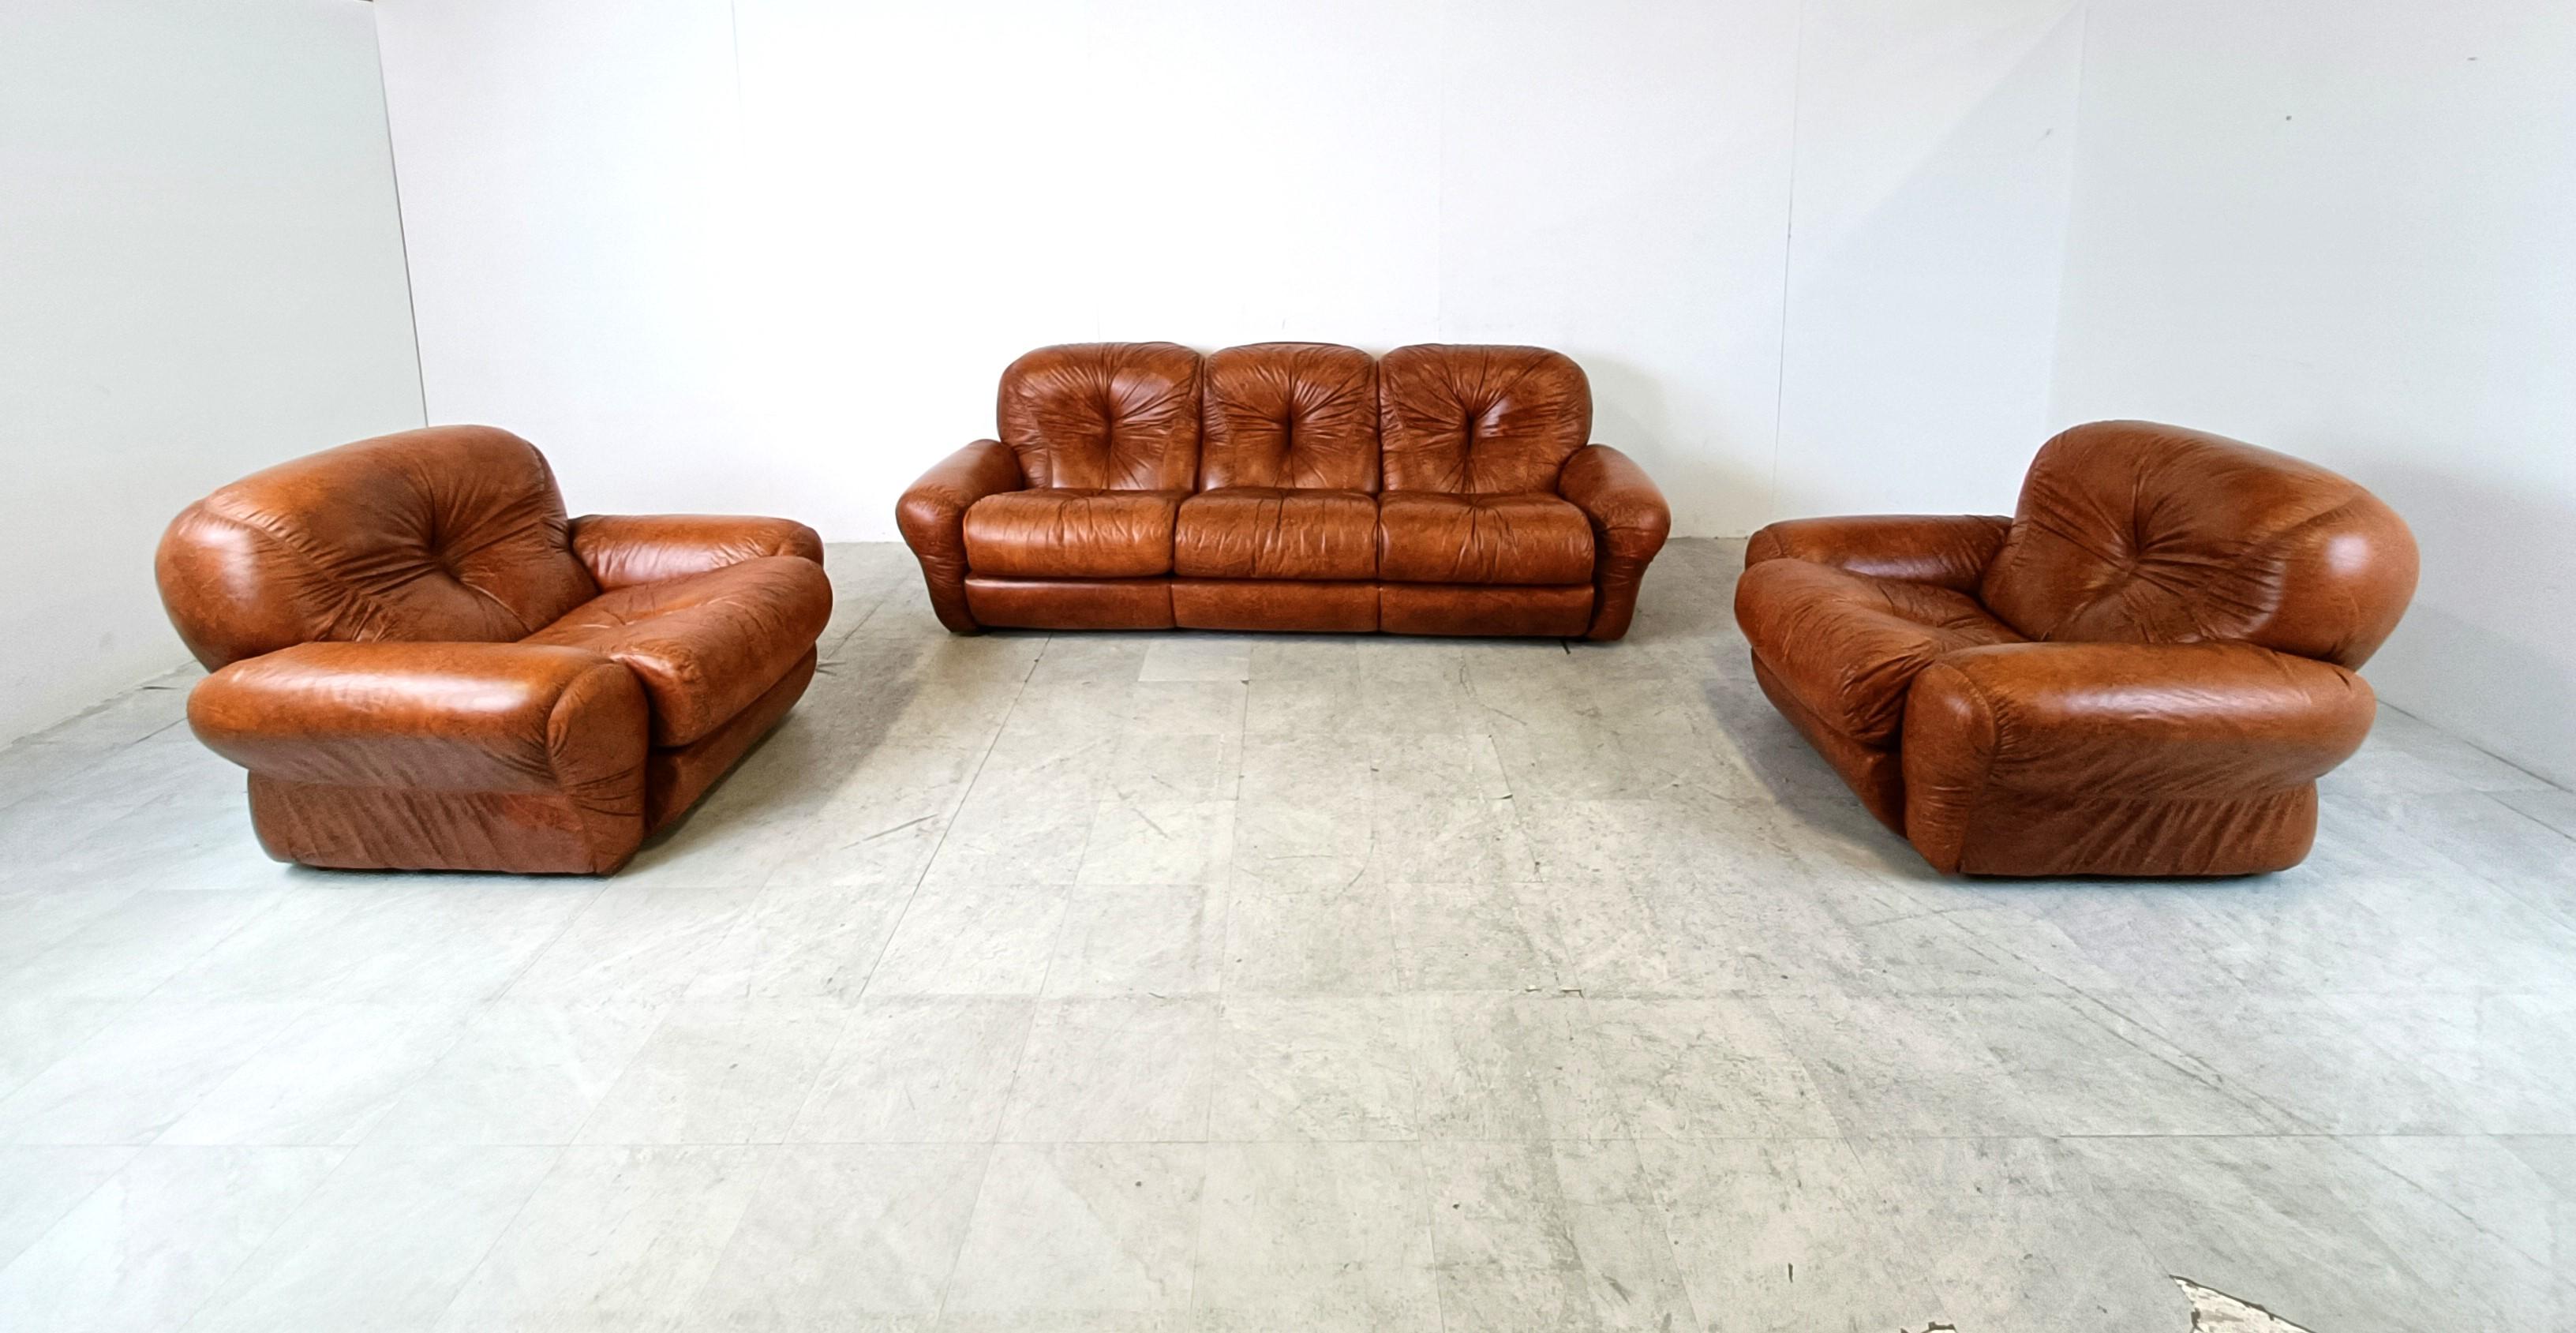 Mid century sofa set in brown faux leather designed in italy in the 1970s.

Very thick and comfortable cushions with an elegant design.

The set consists of a three seater sofa and two armchairs

Good original condition.

1970s -